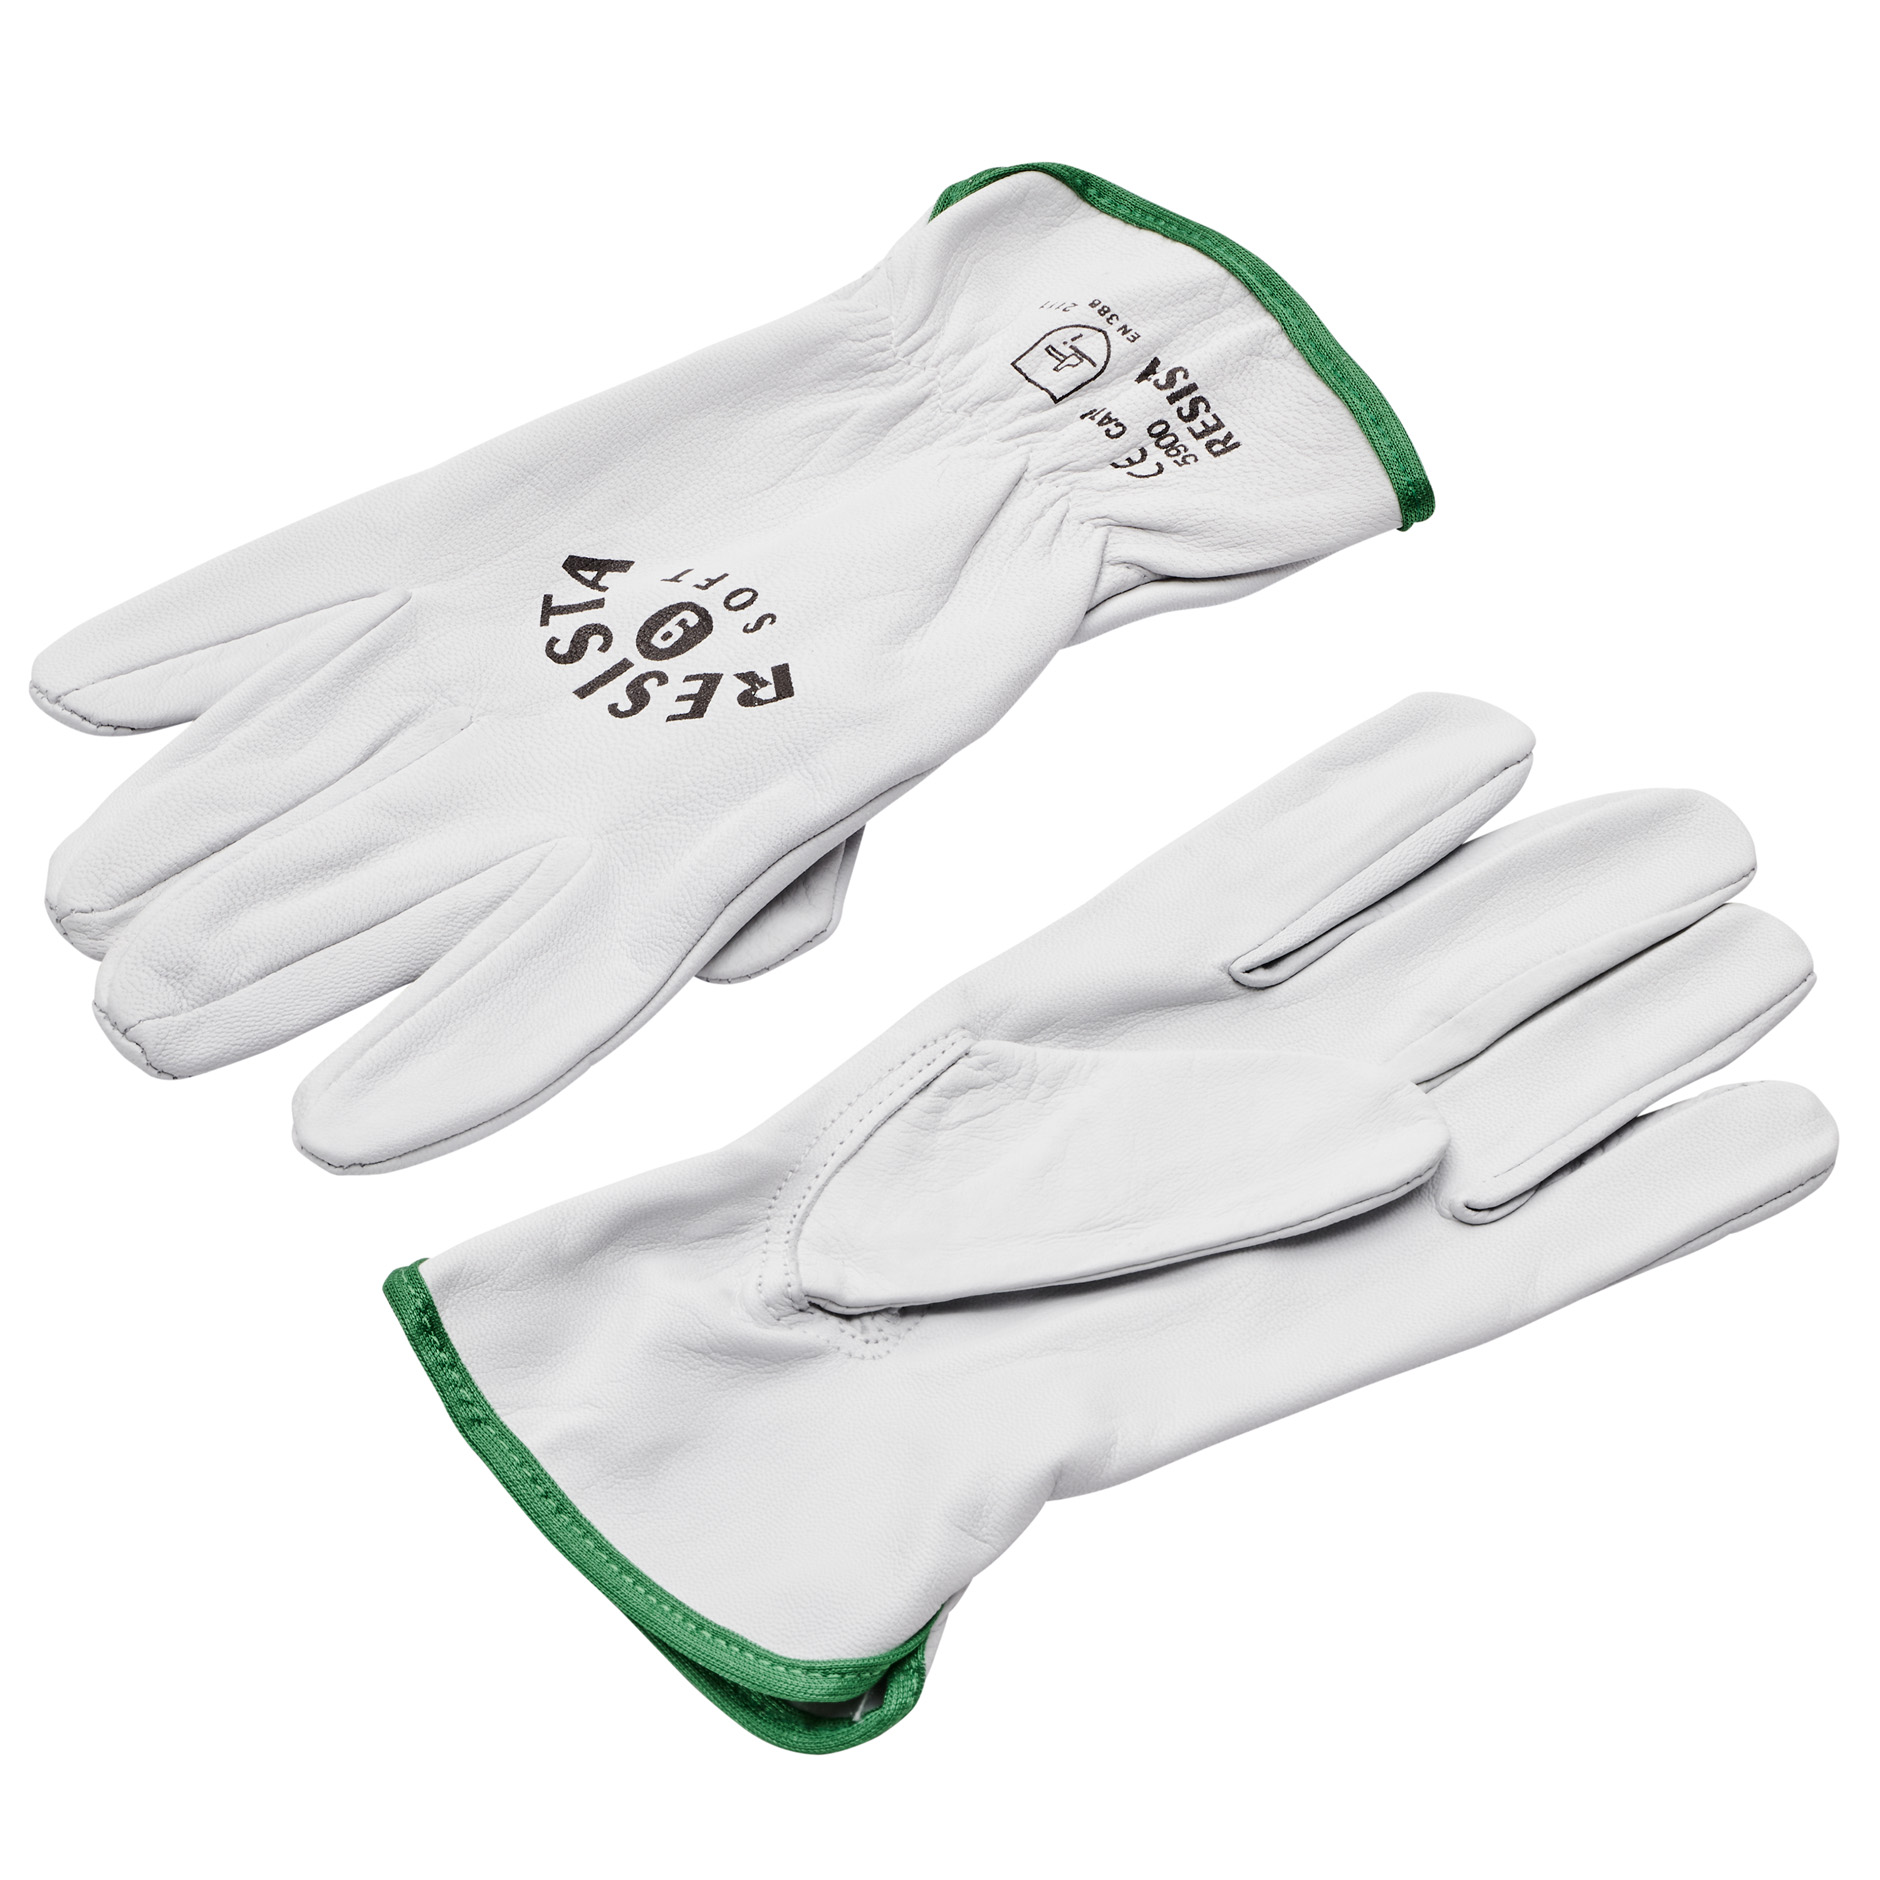 RESISTA Soft 5900 protective gloves sheep nappa leather cat II